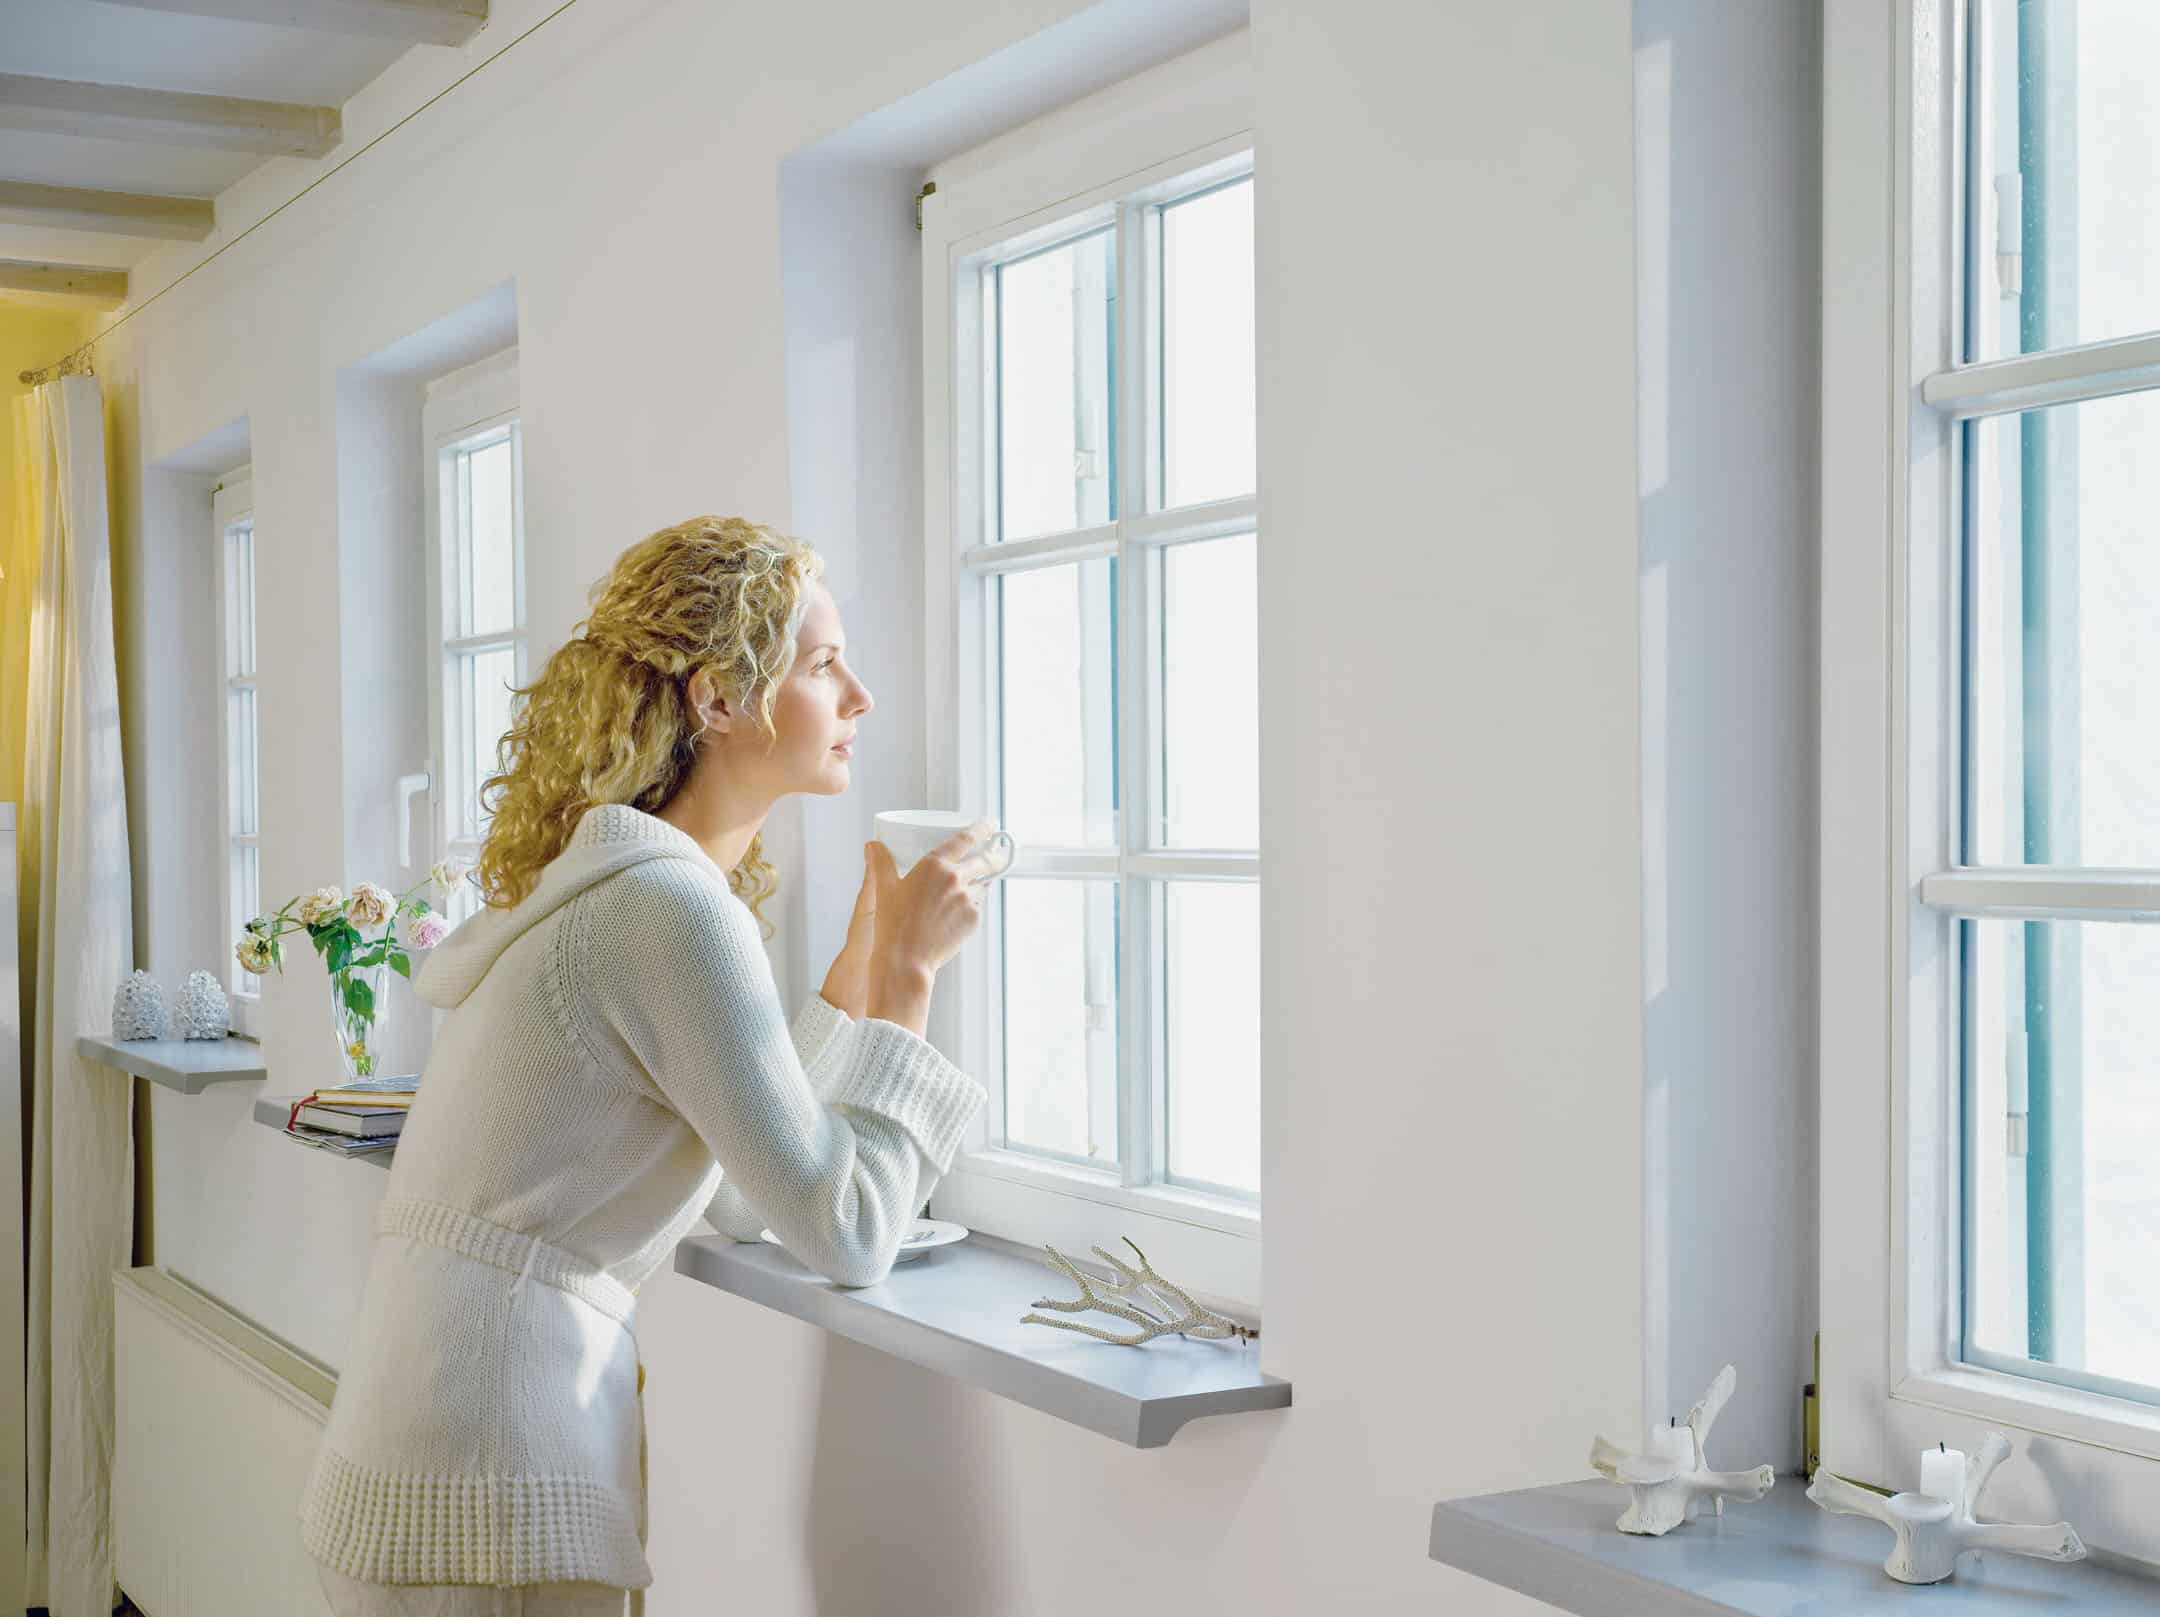 The Main 2 Factors That Determine the Price of Replacement Windows